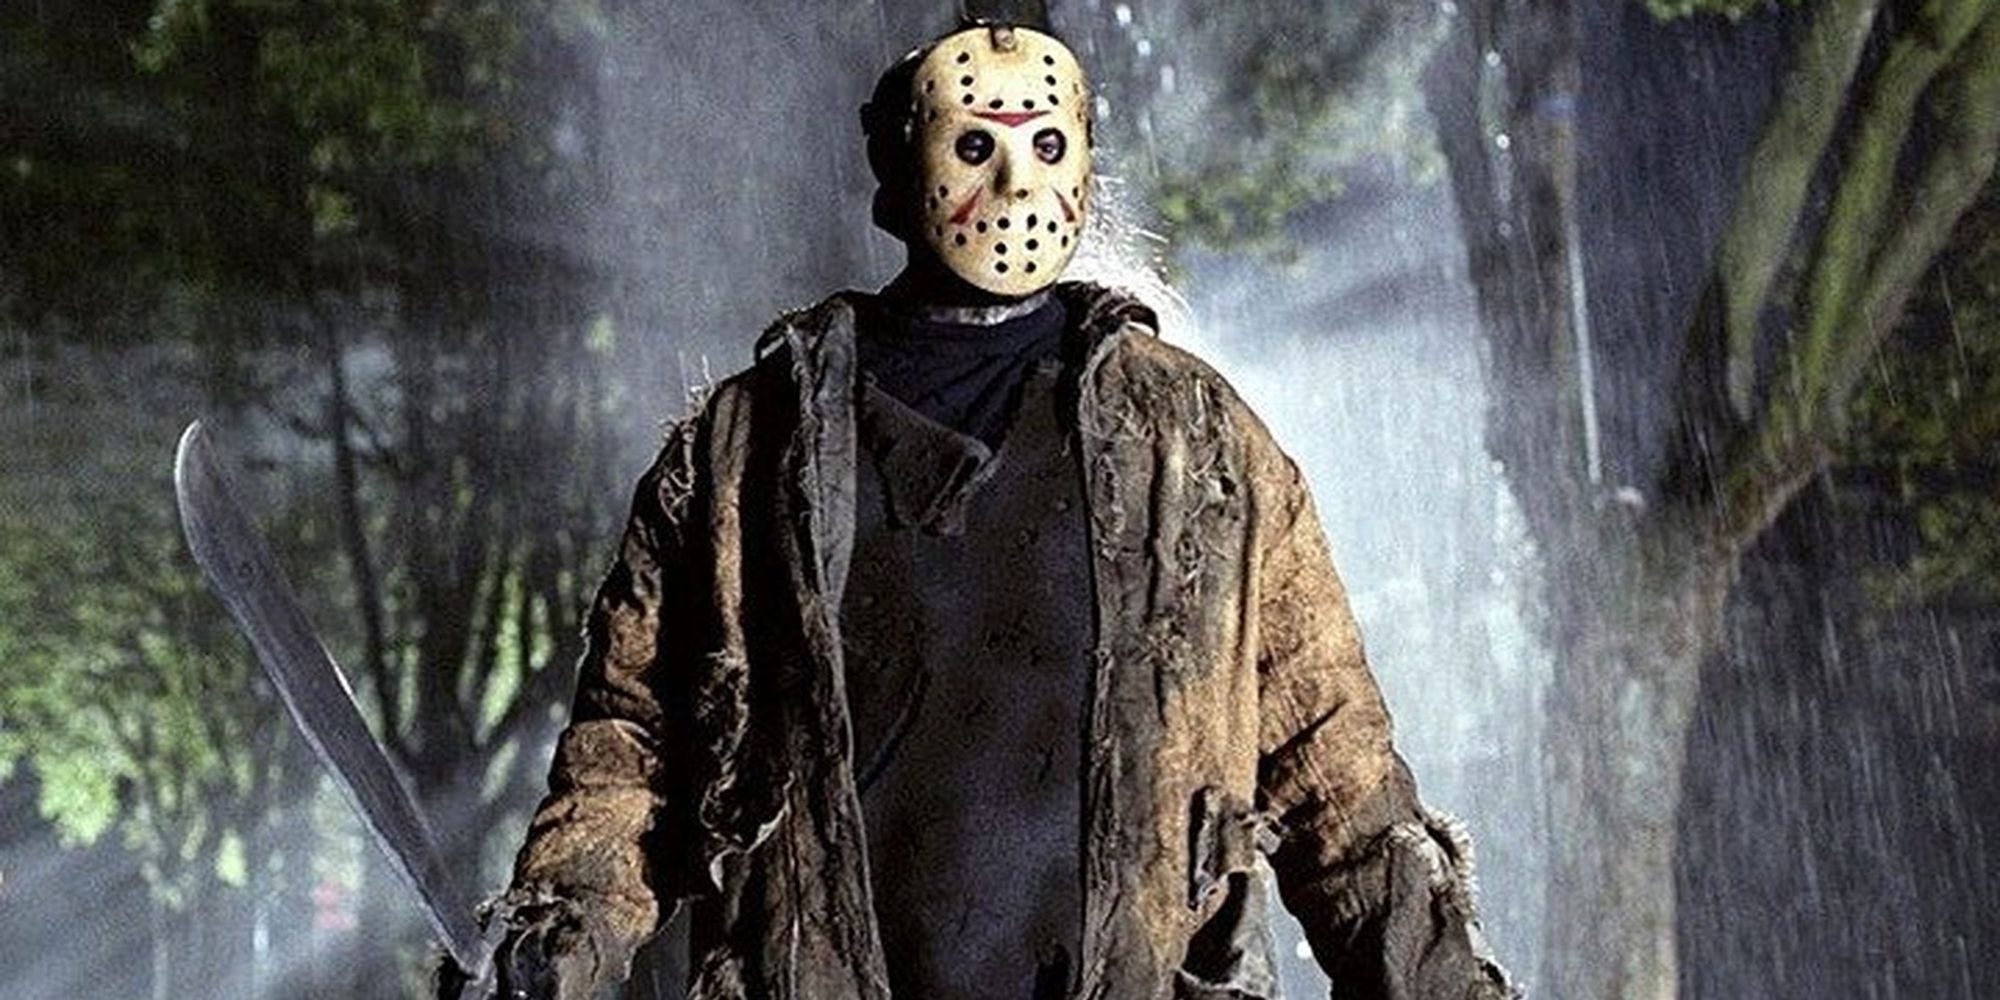 Jason Voorhees In Friday The 13th